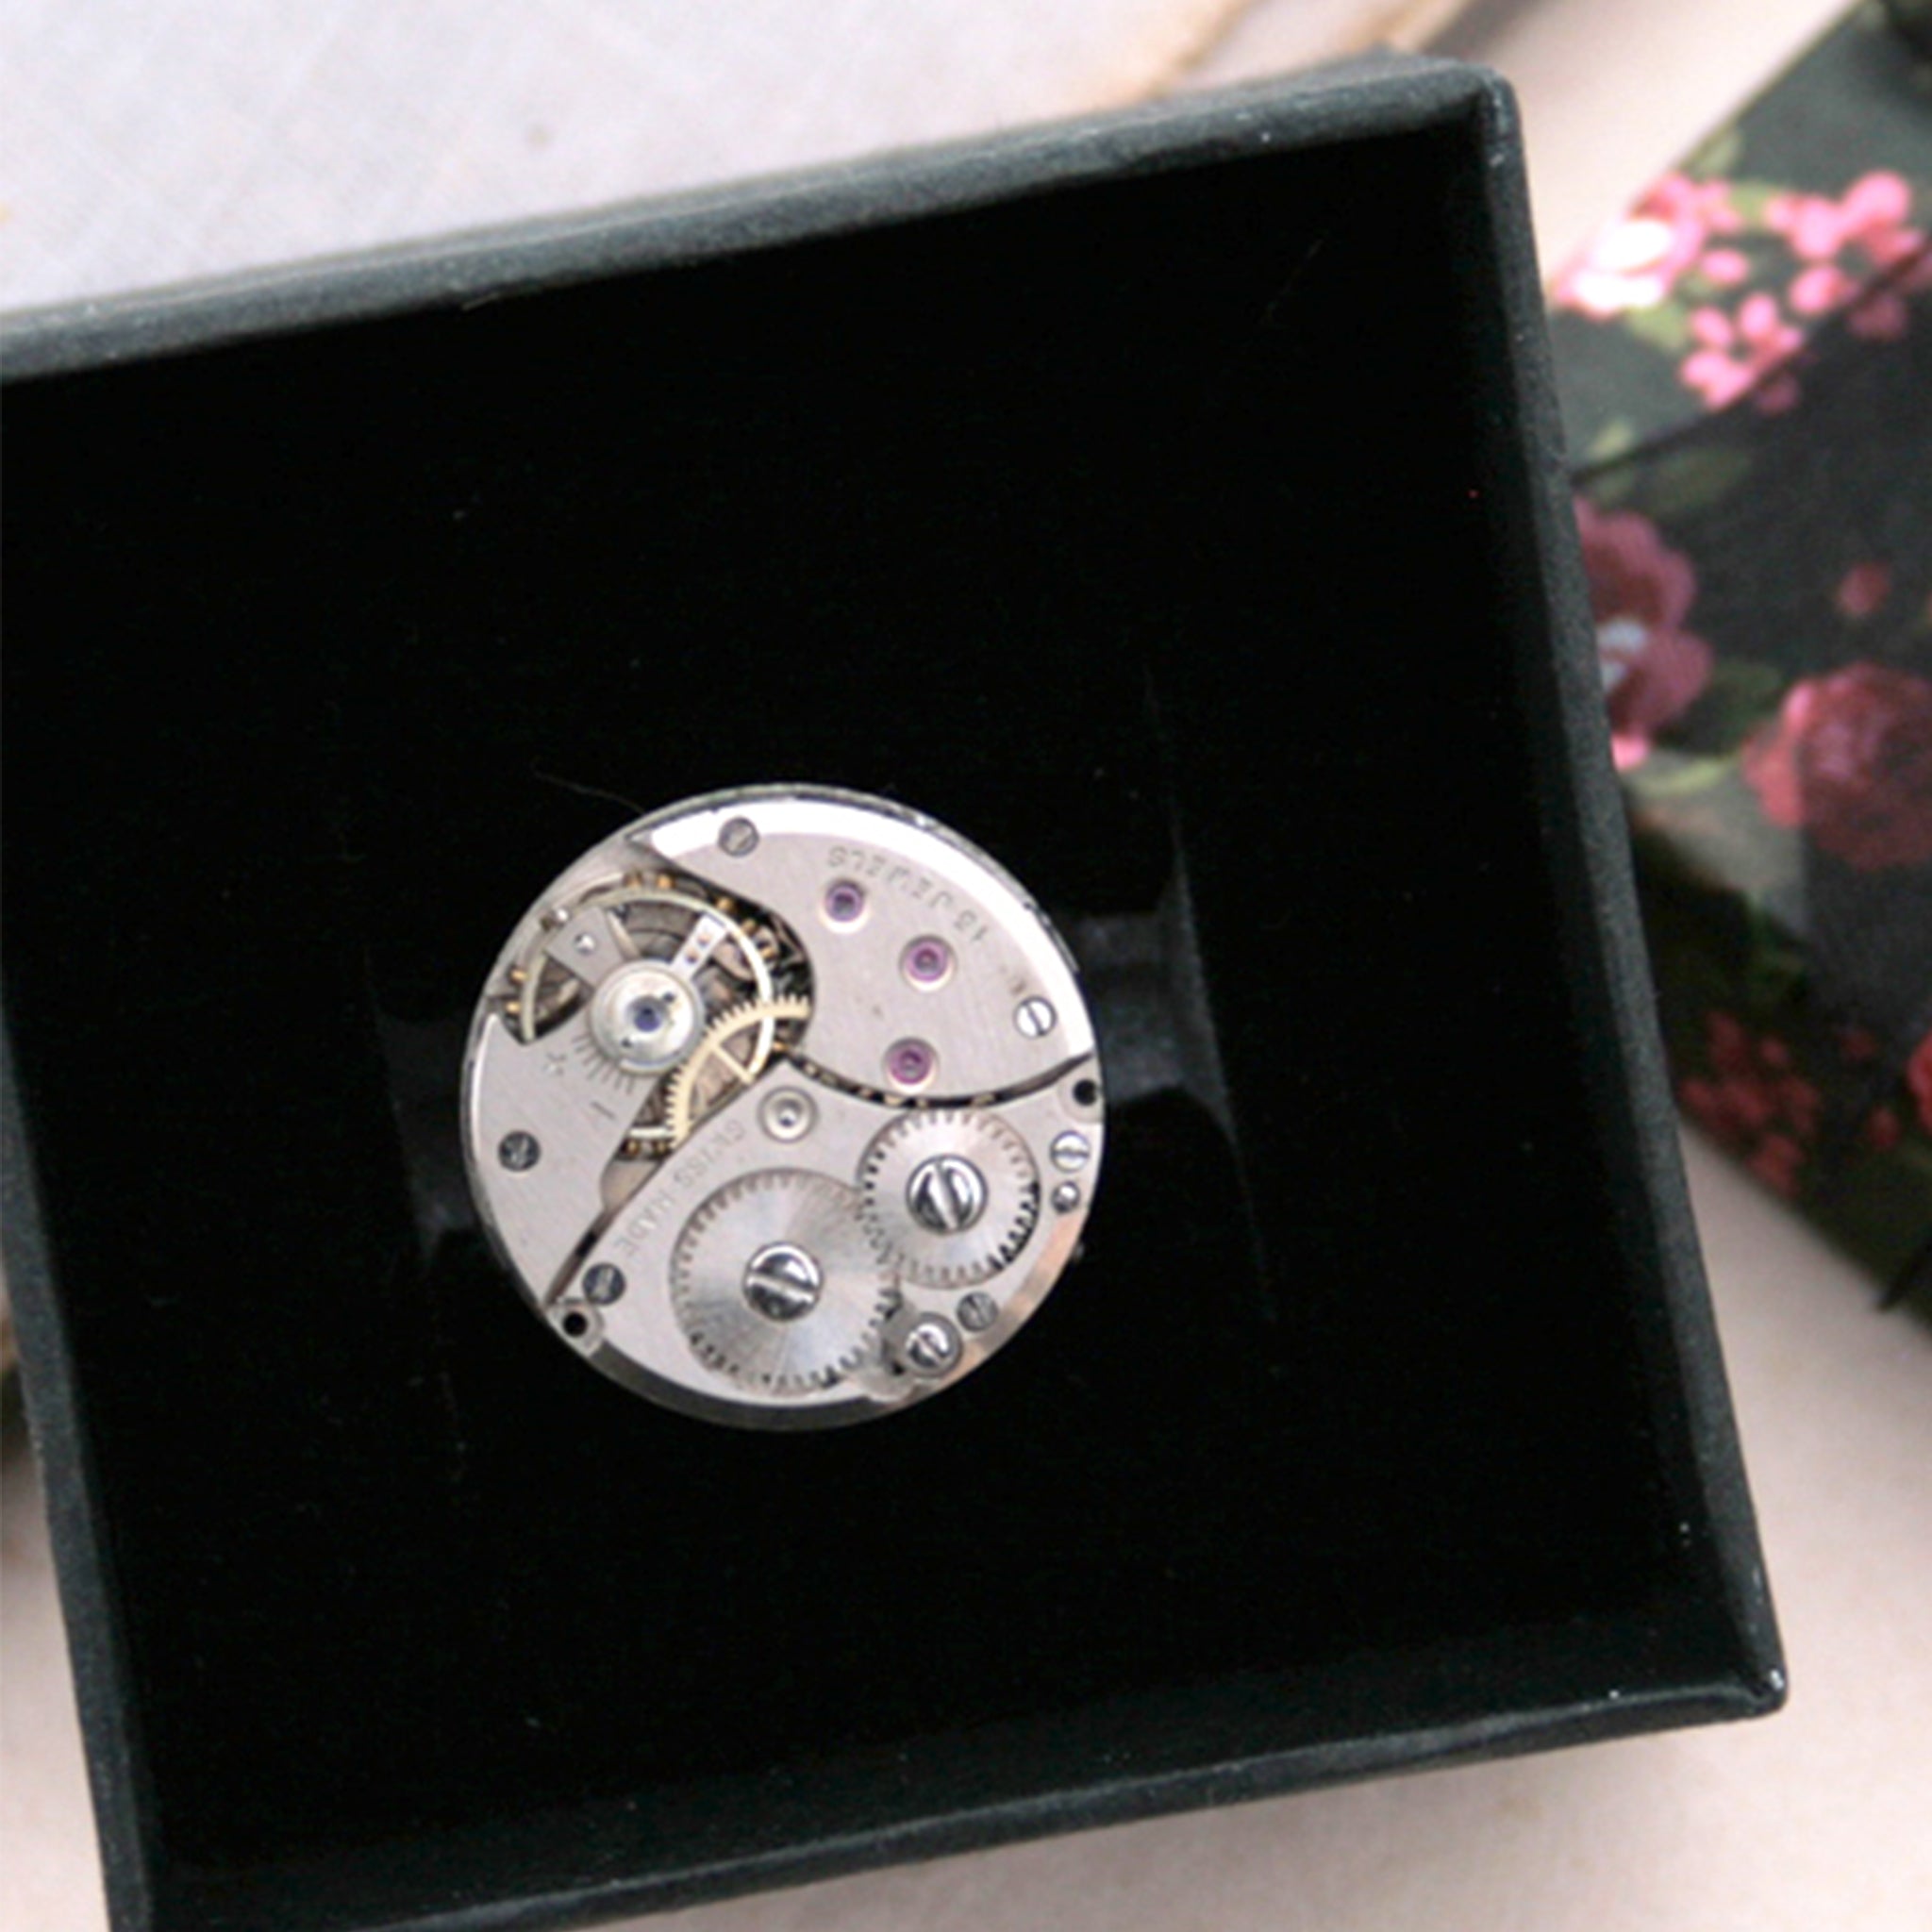 steampunk ring made of a real Swiss watch mechanism in a box